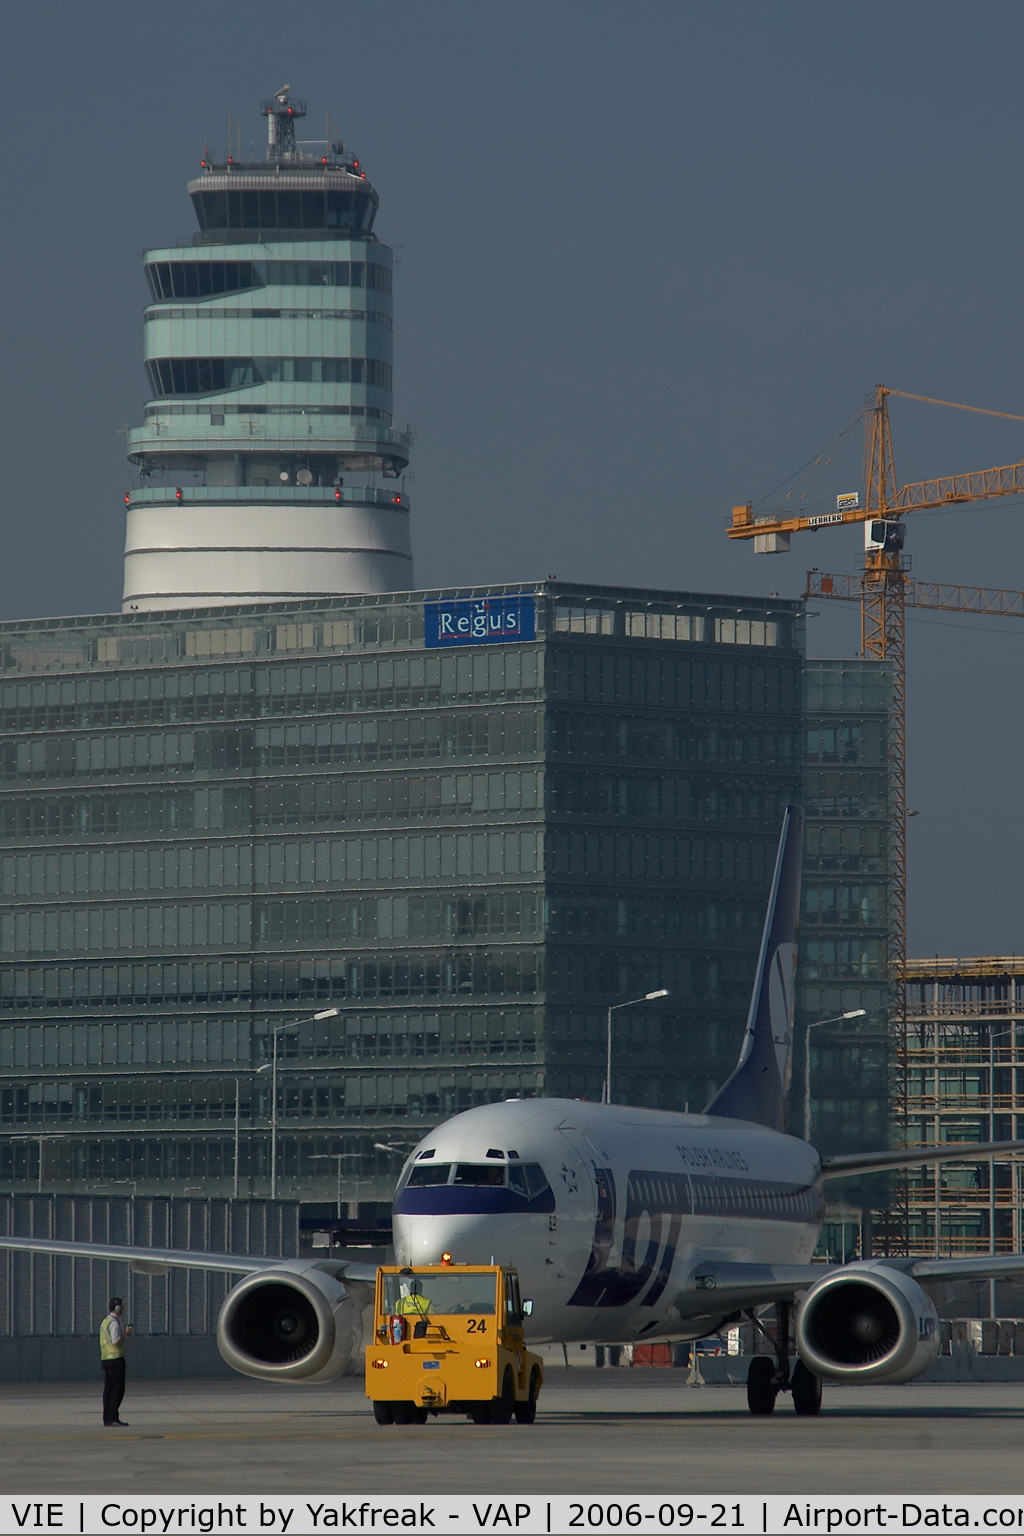 Vienna International Airport, Vienna Austria (VIE) - LOT Boeing 737 pushing back infront of the office park and the control tower